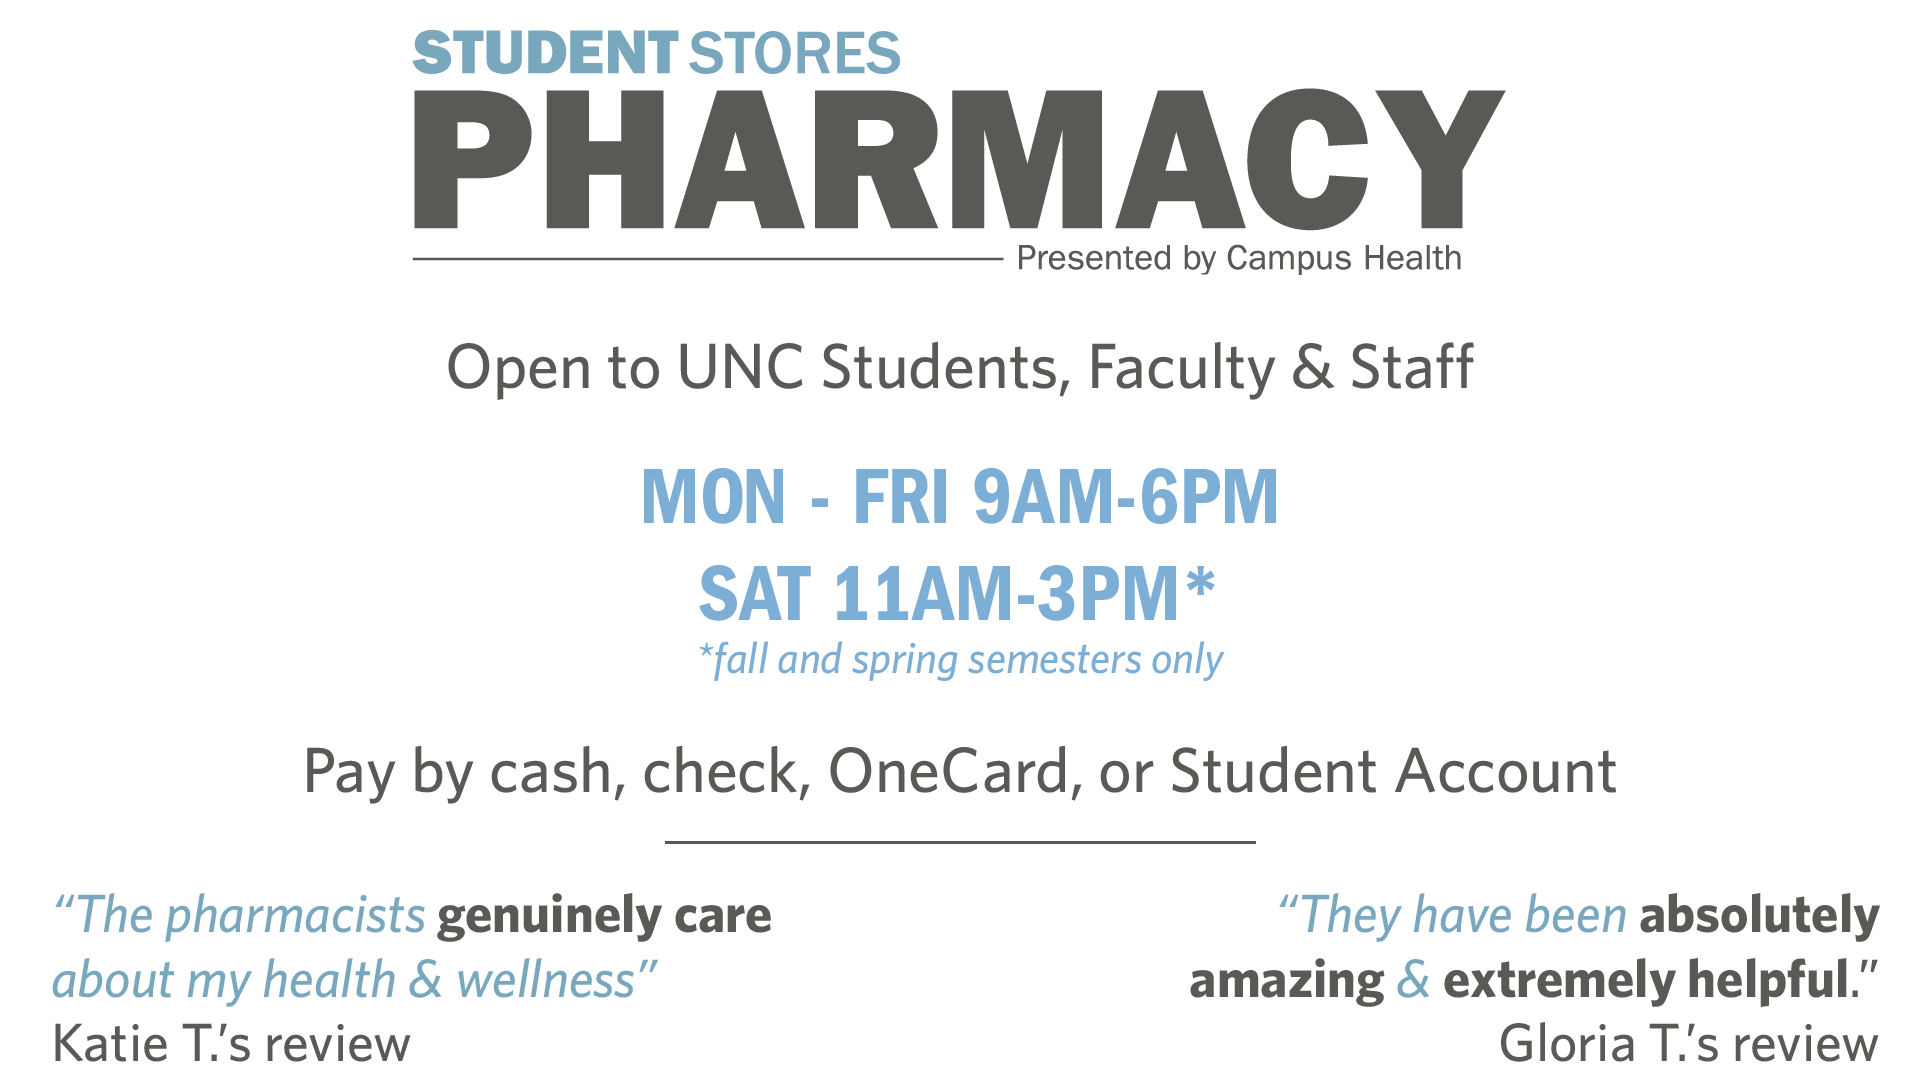 open to students faculty and staff, pay by cash, check, one card or student account